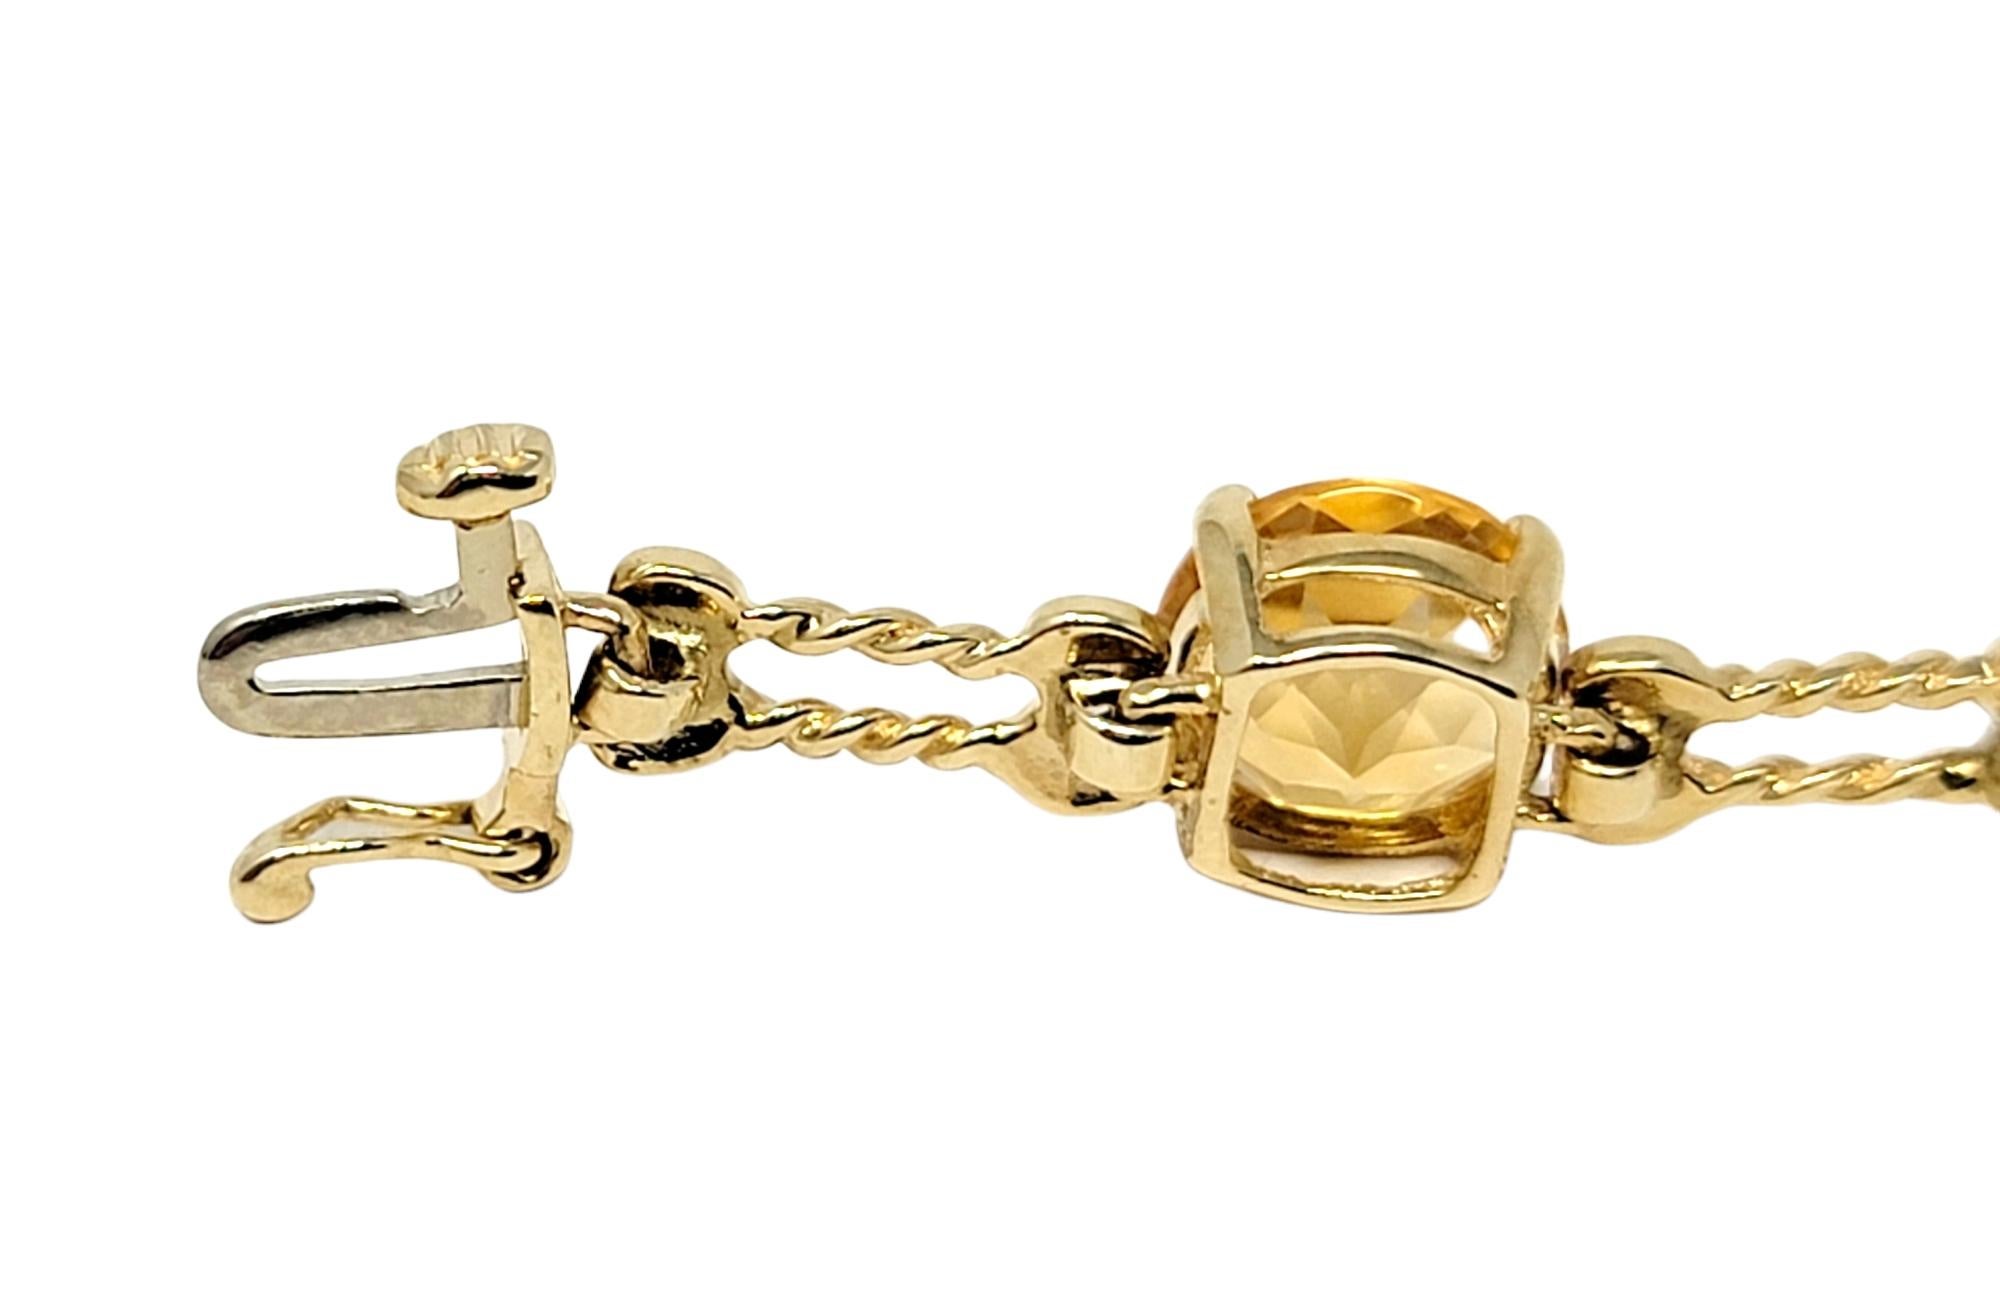 12.72 Carats Round Mixed Cut Citrine and Diamond Line Bracelet in 10 Karat Gold In Good Condition For Sale In Scottsdale, AZ